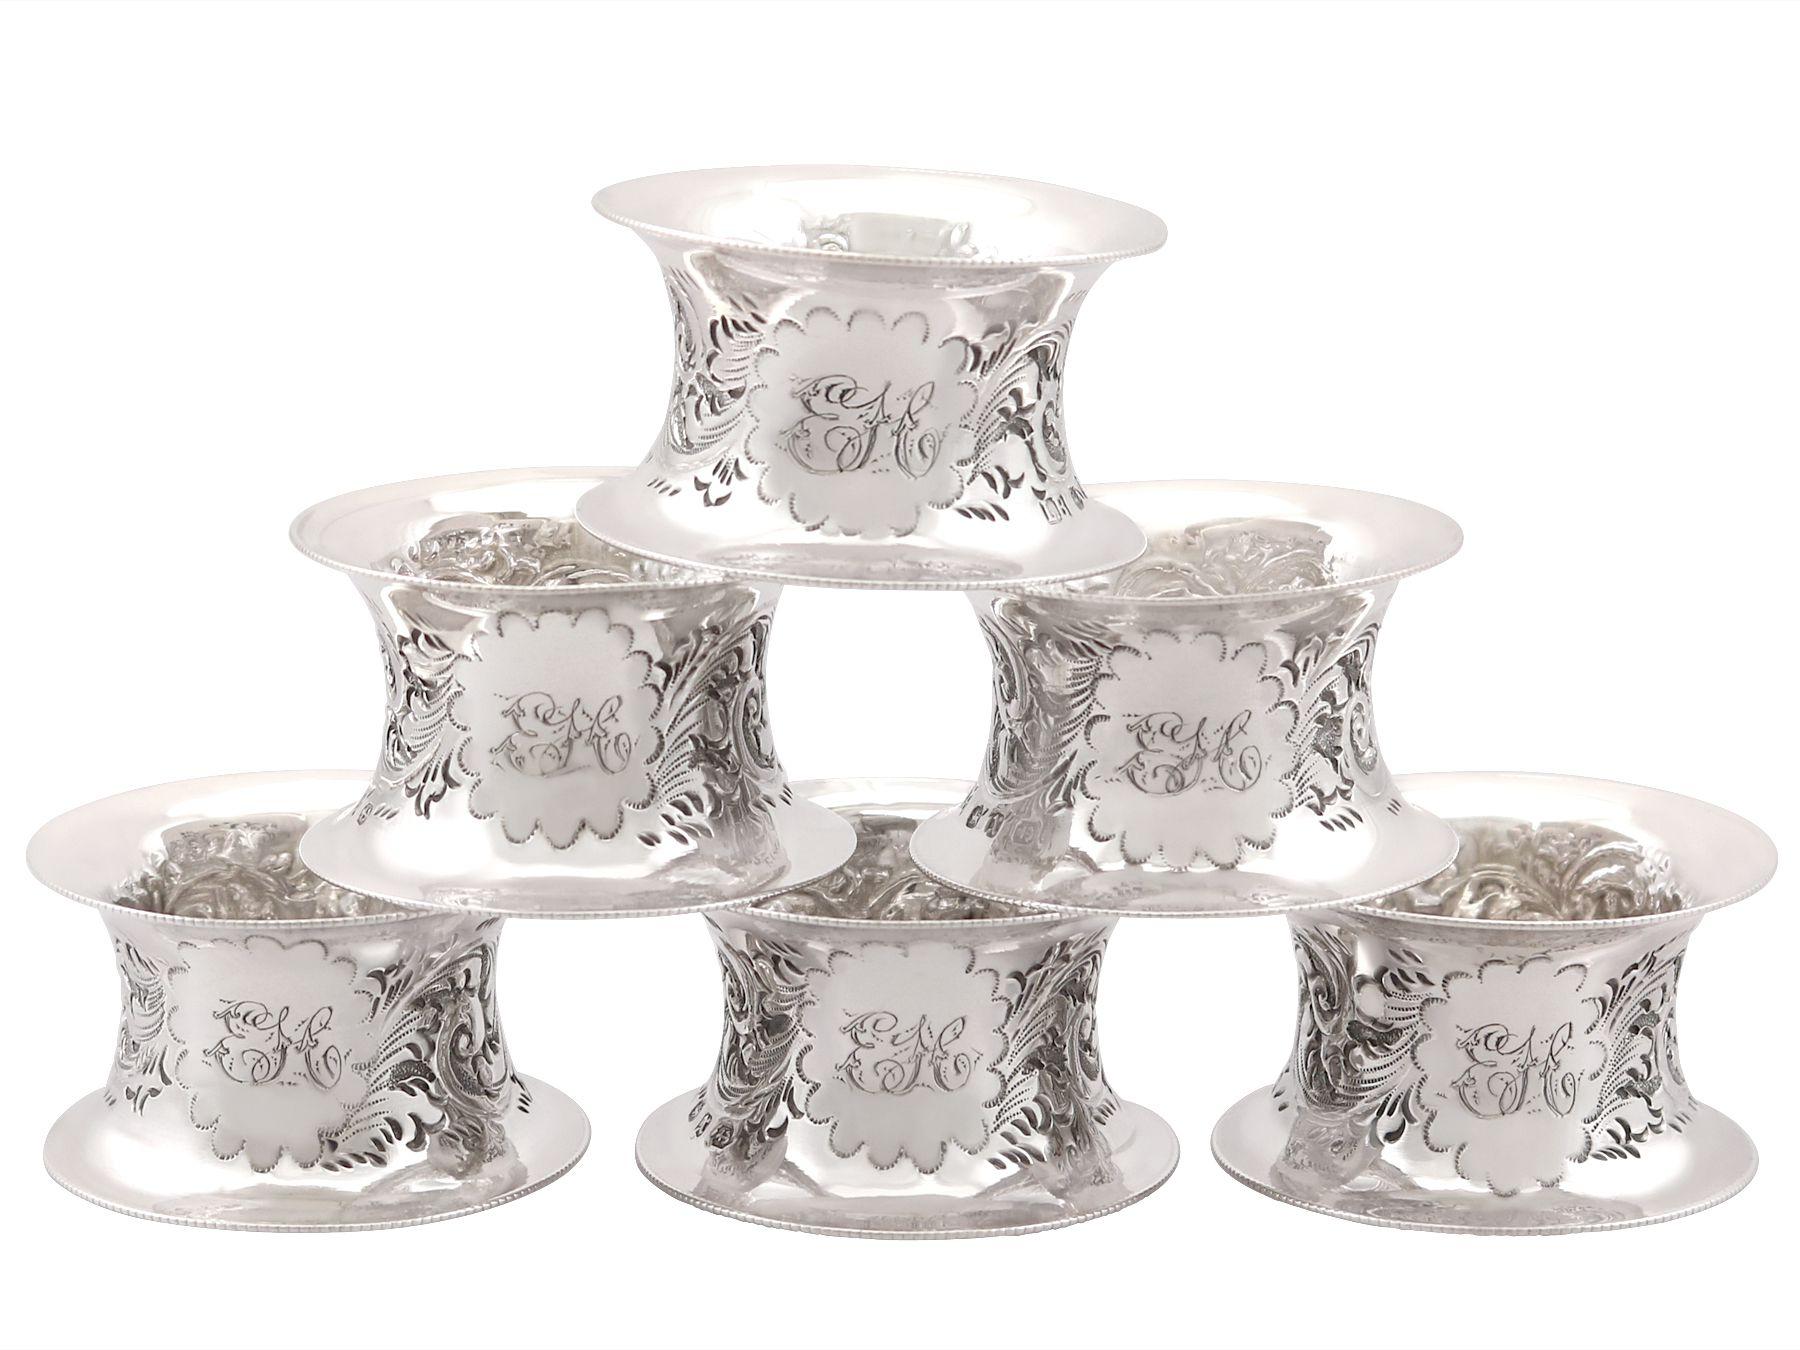 An exceptional, fine and impressive set of six antique Victorian English sterling silver napkin rings - boxed; an addition to our dining silverware collection.

This exceptional set of antique Victorian silver napkin rings consists of six napkin